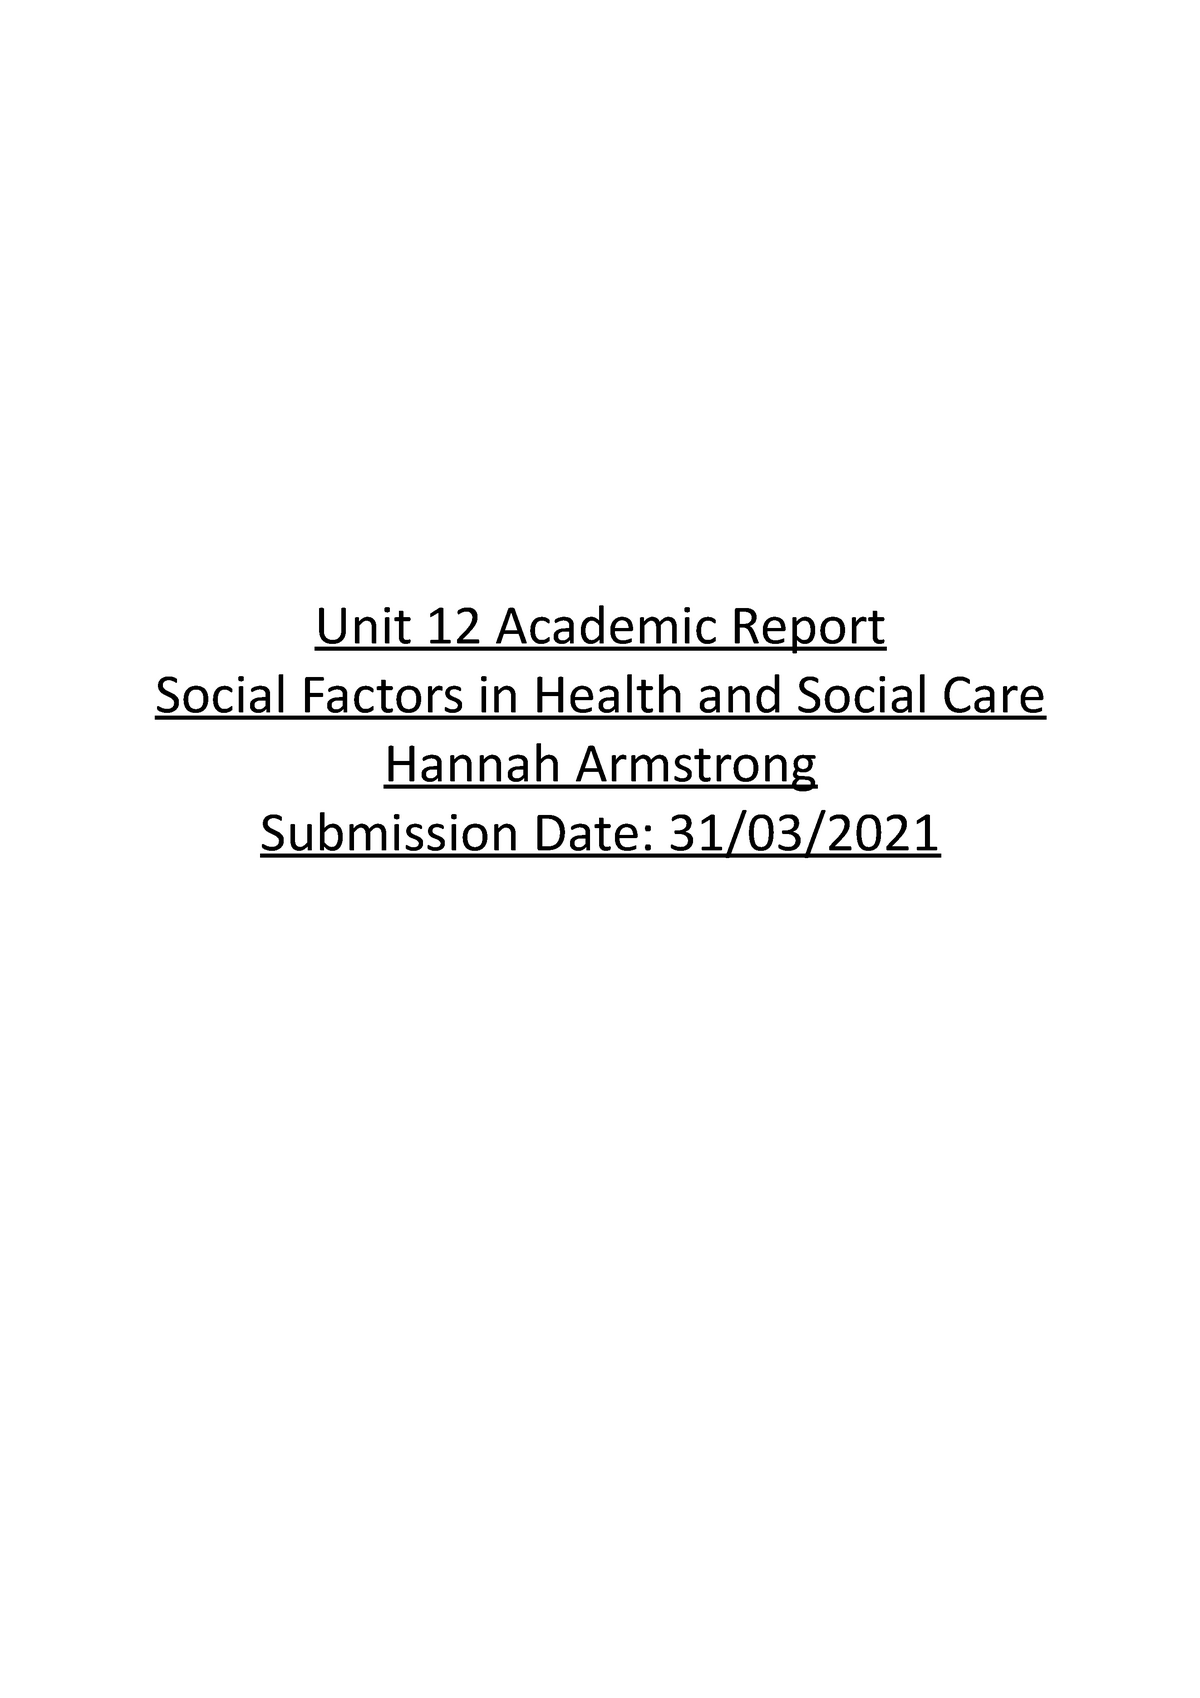 health and social care unit 12 assignment 1